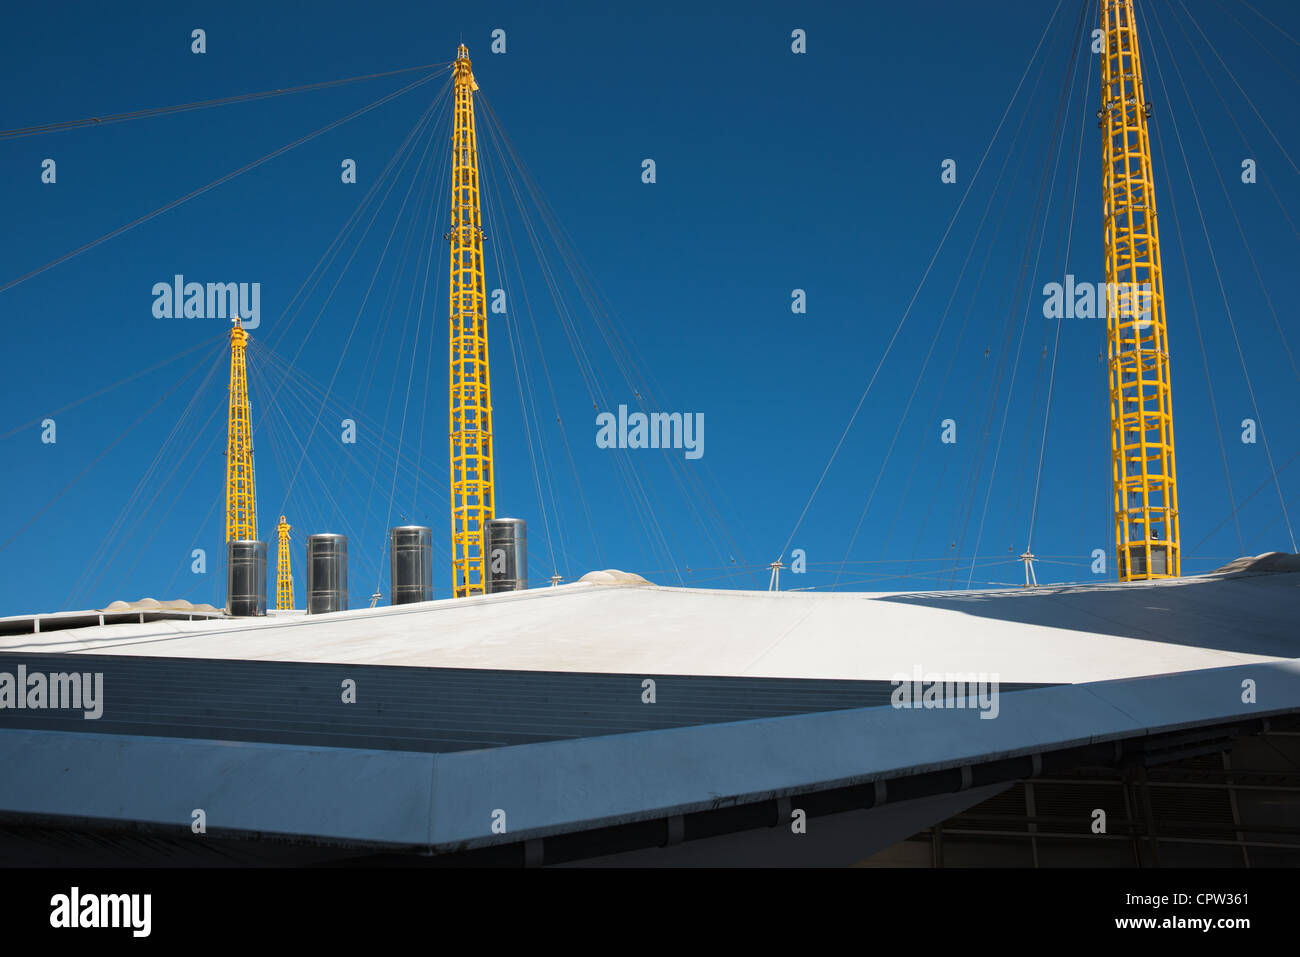 Abstract architecture of O2 Arena - formally Millennium dome, London, England. Stock Photo